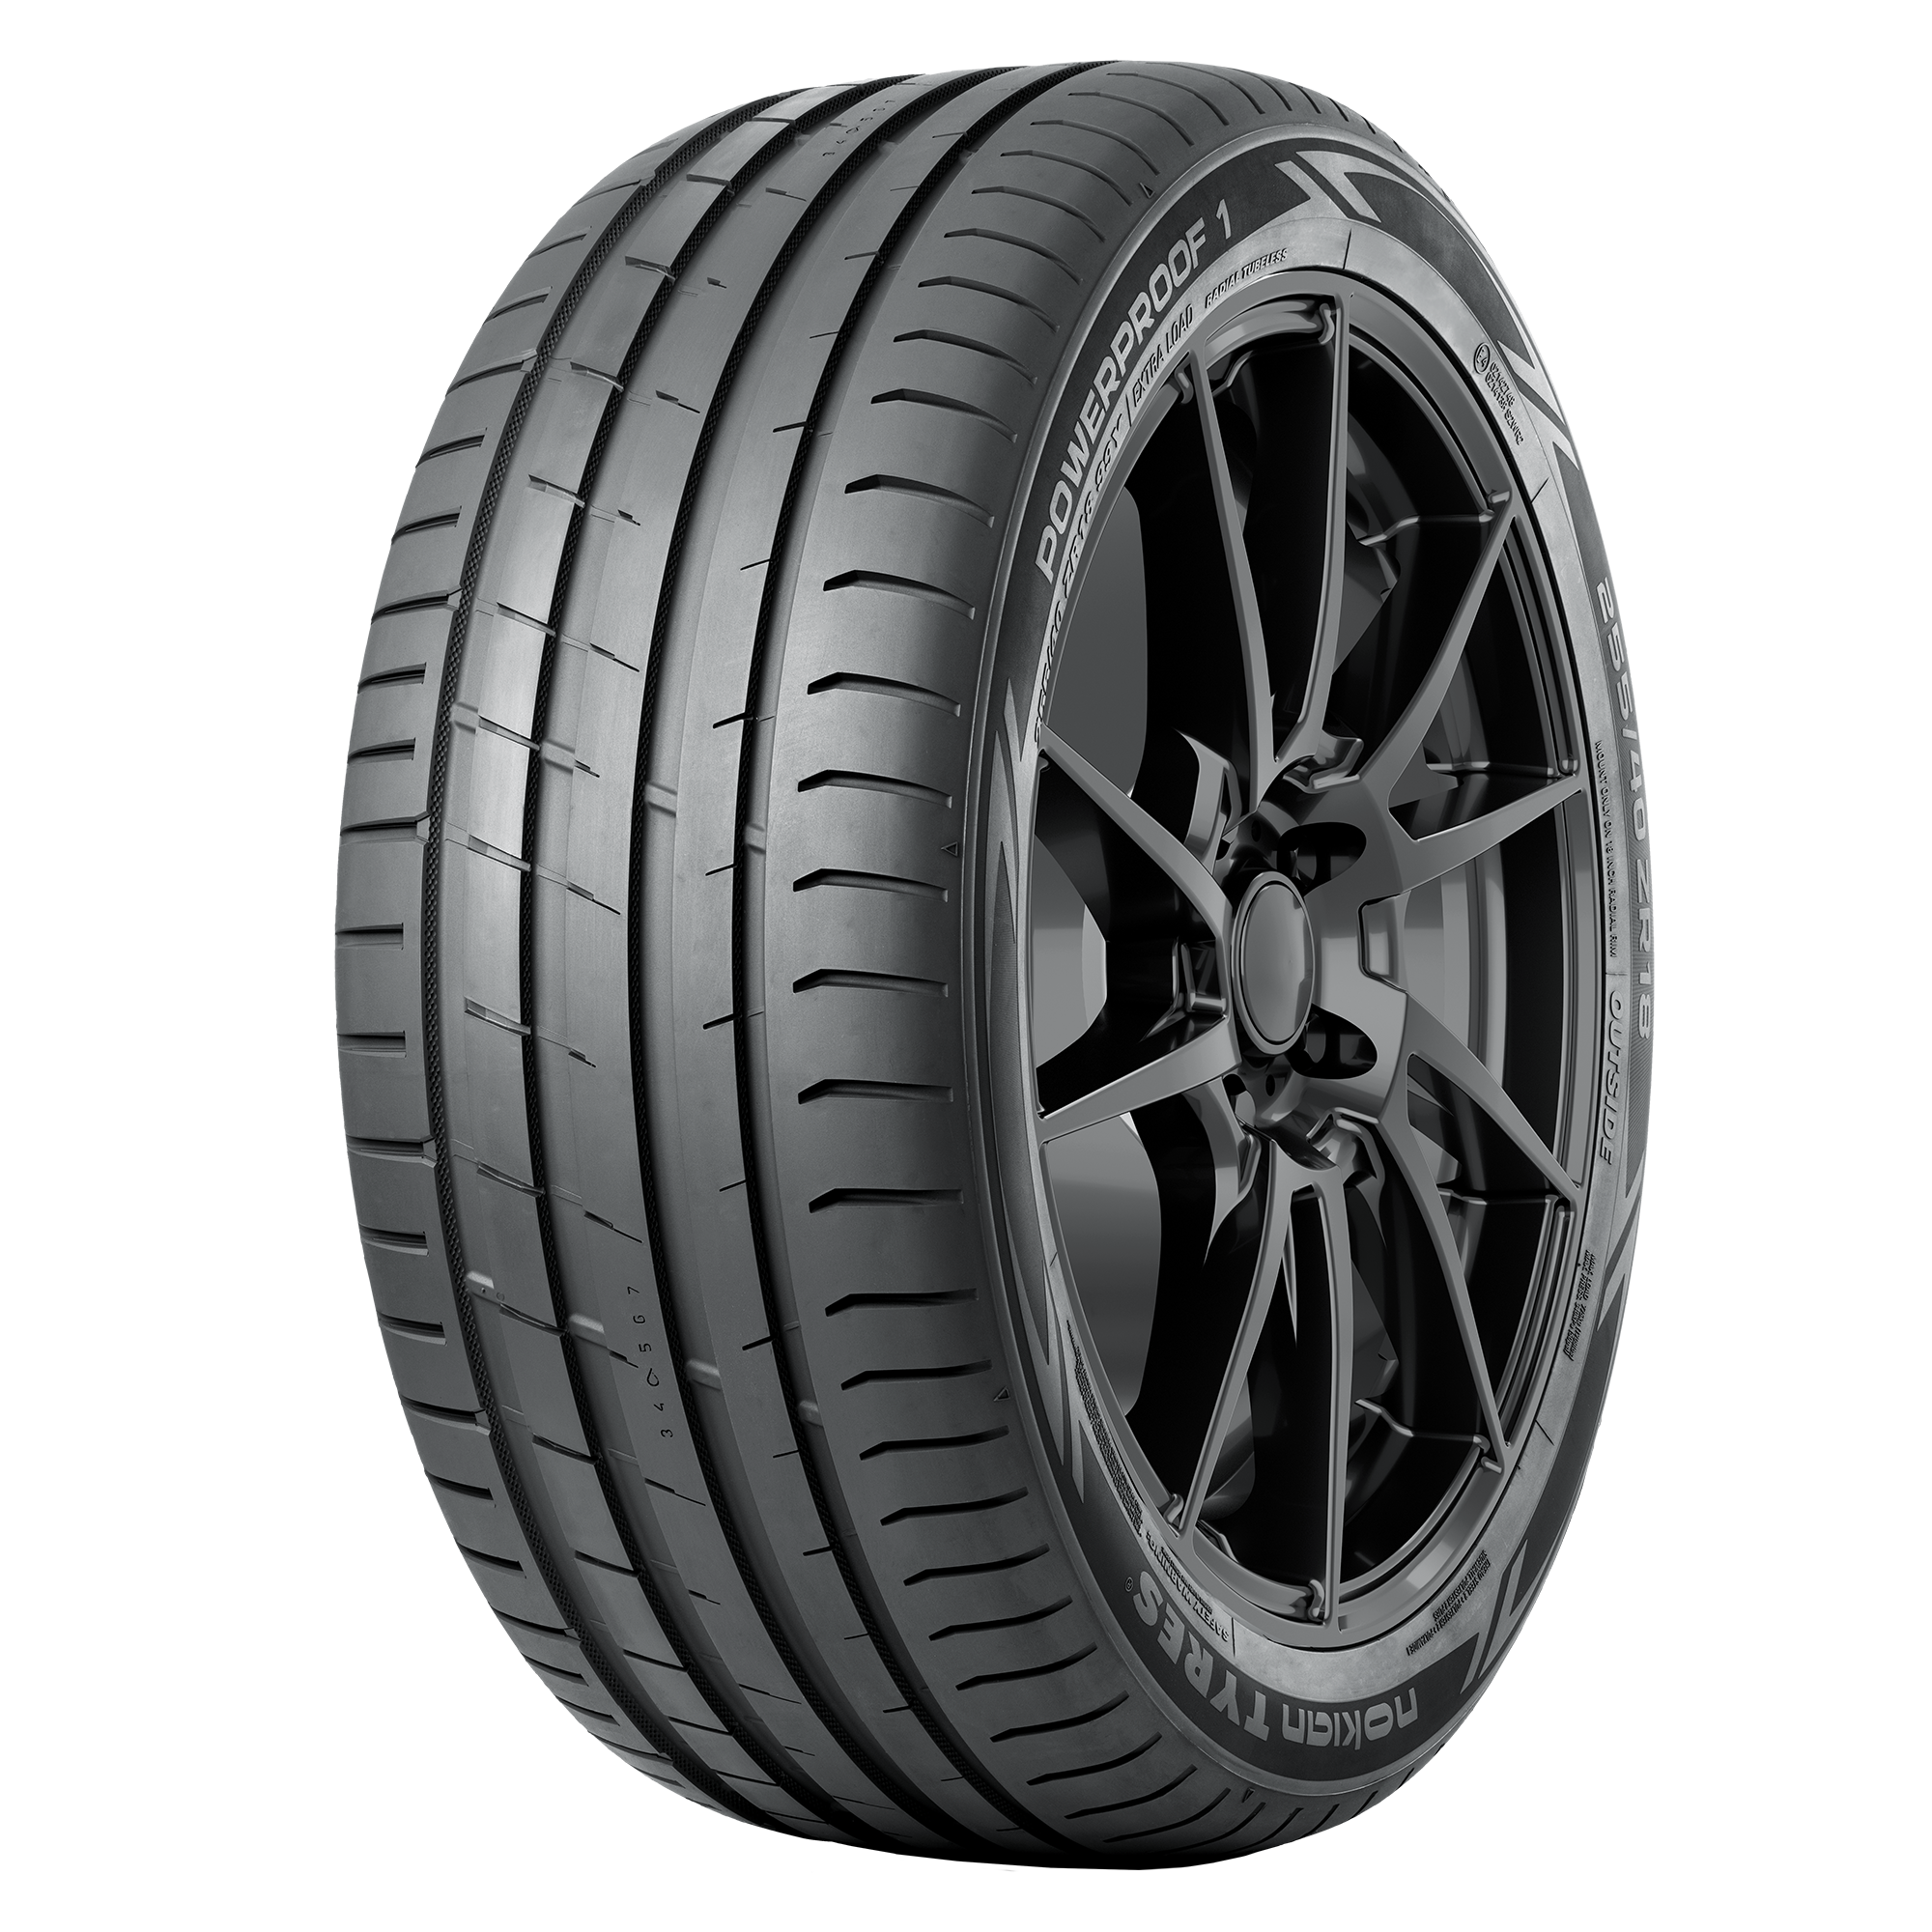 Nokian_Tyres_Powerproof_1_with_rim_cut-out